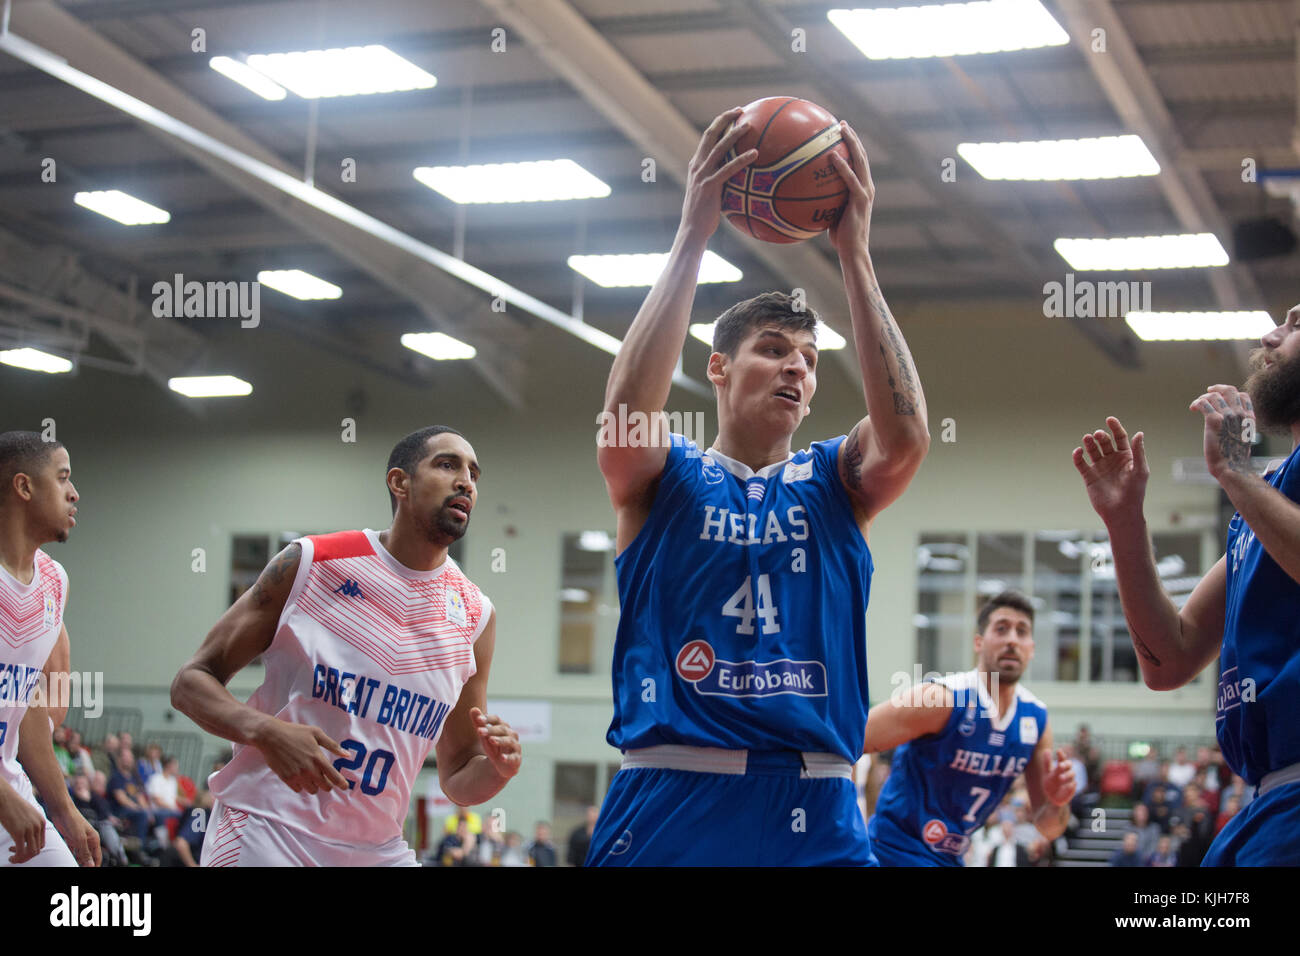 Leicester, UK. 24th Nov, 2017. FIBA World Cup qualifier fixture. Team GB vs Greece. Leicester Arena, Leicester. Credit: carol moir/Alamy Live News Stock Photo